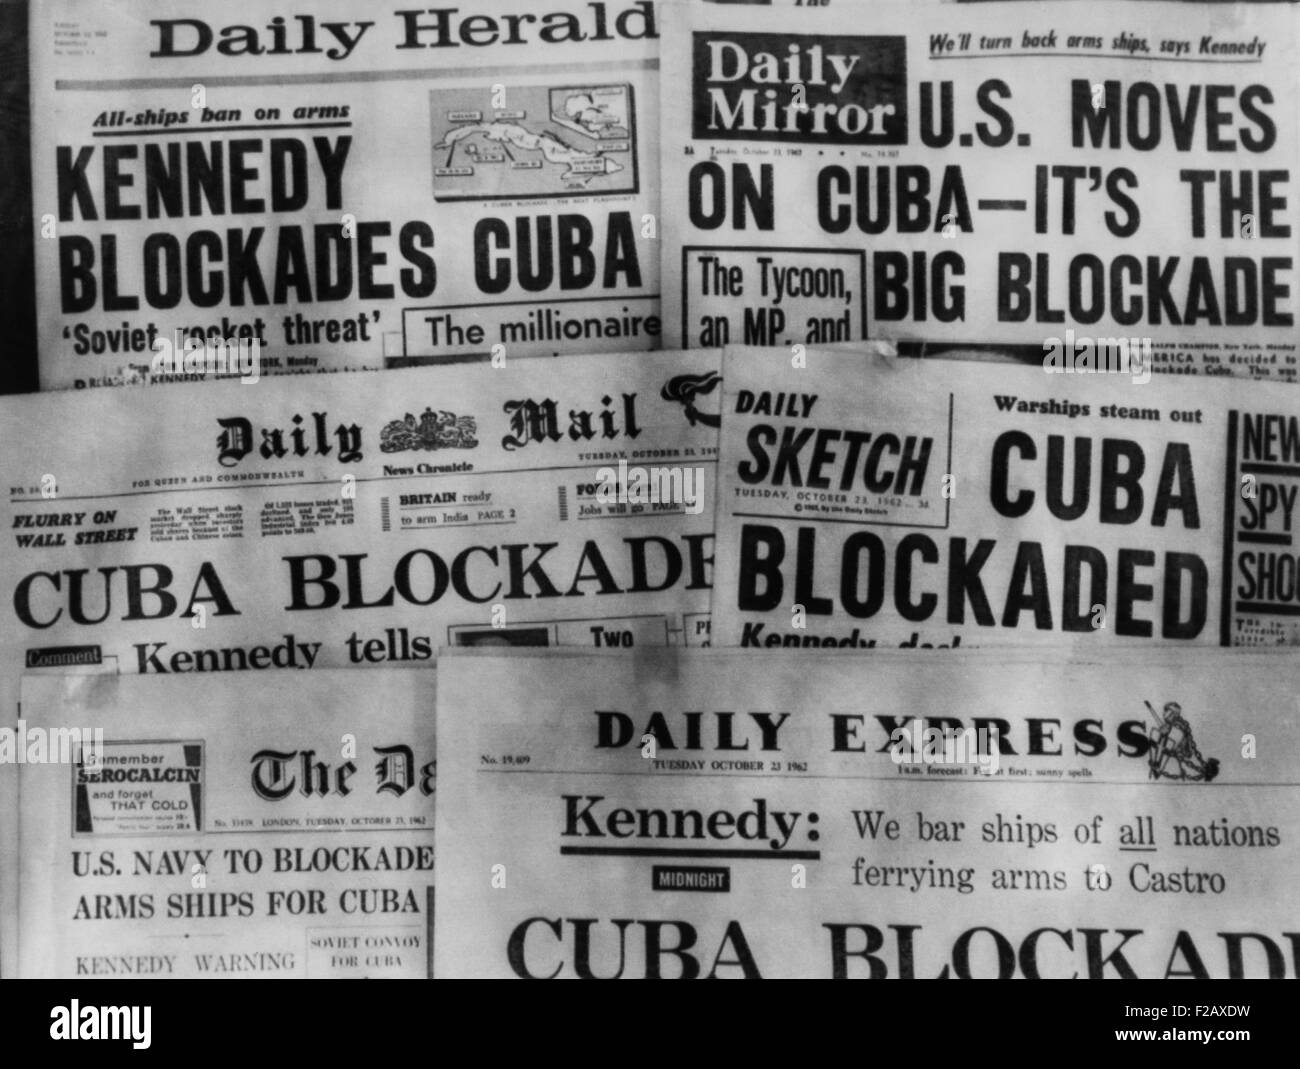 Headline of Britain's daily newspapers announcing President Kennedy's blockade of Cuba. Oct. 23, 1962. (BSLOC 2015 2 231) Stock Photo